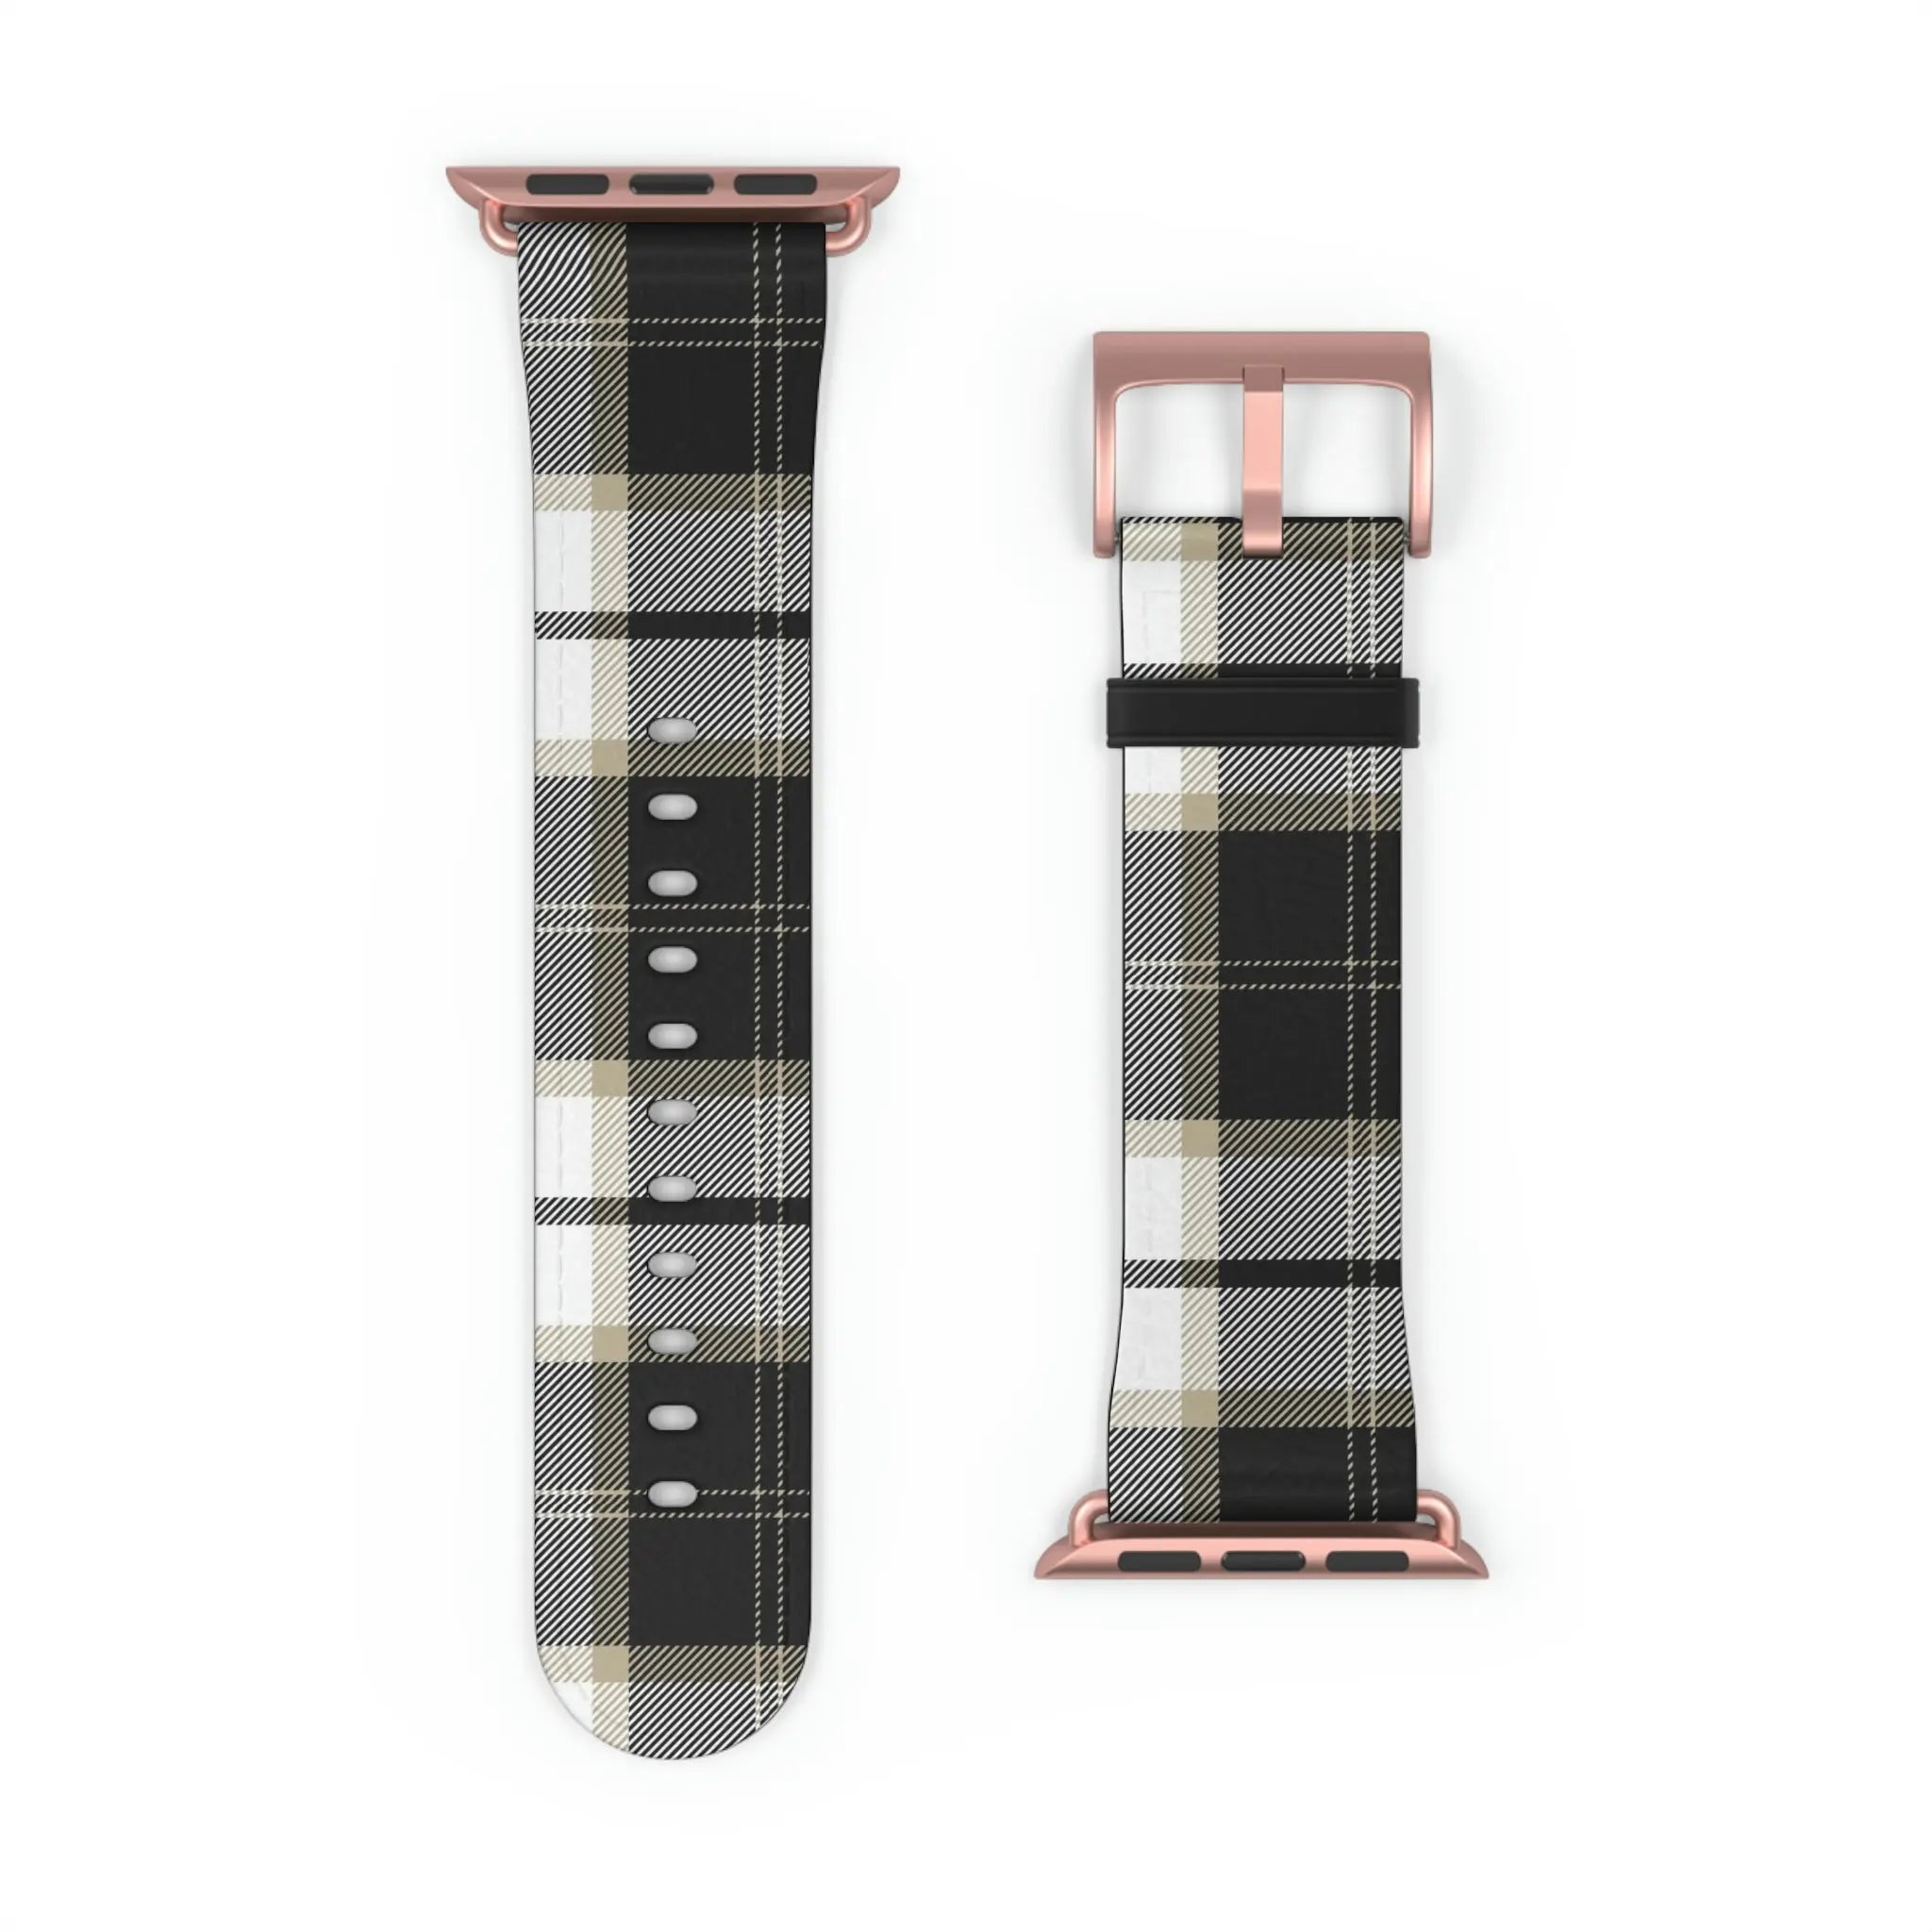  Designer Collection in Plaid (Grey Mix) Apple Watch Band Watch Band